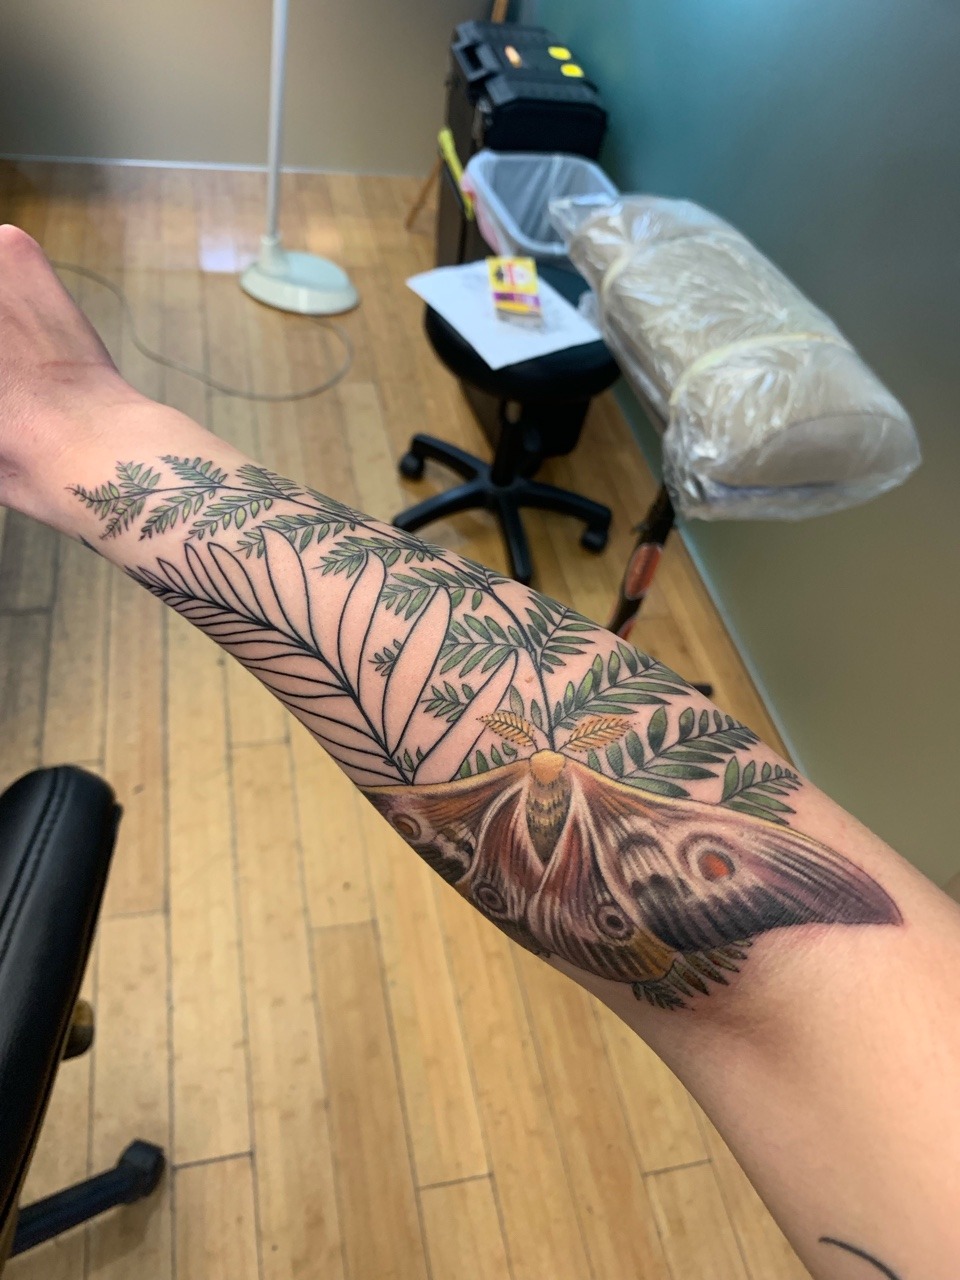 Got a rendition of Ellie's tattoo from The Last of Us 2! Skillfully drawn  by @hypnatic on Instagram - thelastofus post - Imgur